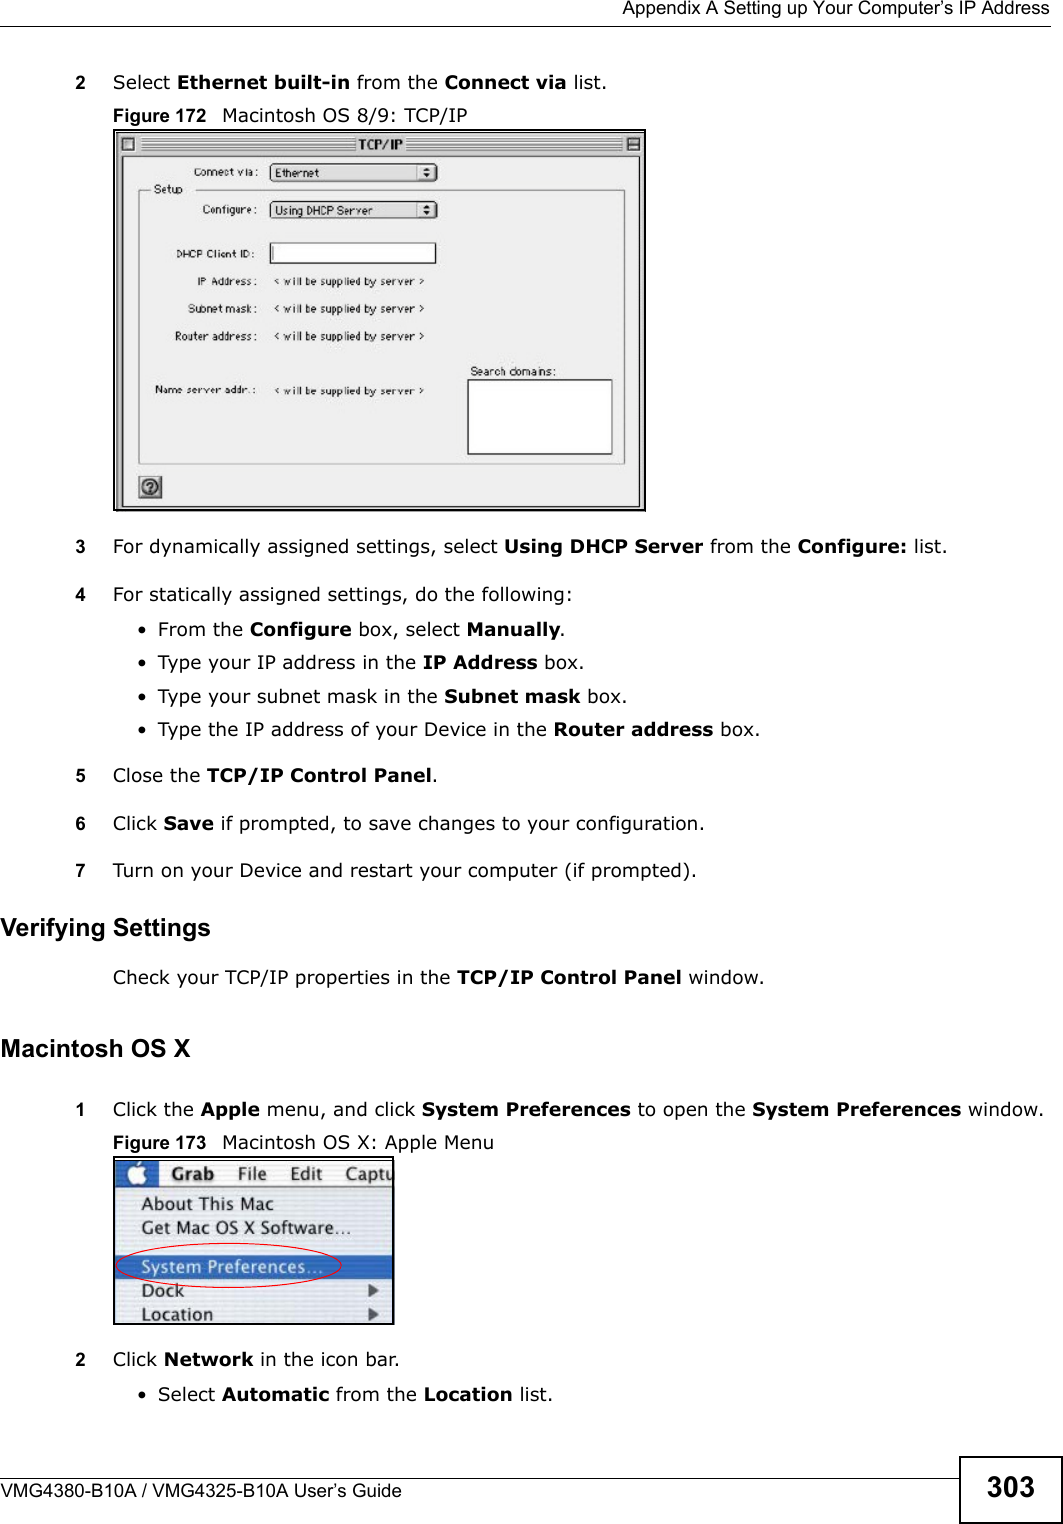  Appendix A Setting up Your Computer’s IP AddressVMG4380-B10A / VMG4325-B10A User’s Guide 3032Select Ethernet built-in from the Connect via list.Figure 172   Macintosh OS 8/9: TCP/IP3For dynamically assigned settings, select Using DHCP Server from the Configure: list.4For statically assigned settings, do the following:• From the Configure box, select Manually.• Type your IP address in the IP Address box.• Type your subnet mask in the Subnet mask box.• Type the IP address of your Device in the Router address box.5Close the TCP/IP Control Panel.6Click Save if prompted, to save changes to your configuration.7Turn on your Device and restart your computer (if prompted).Verifying SettingsCheck your TCP/IP properties in the TCP/IP Control Panel window.Macintosh OS X1Click the Apple menu, and click System Preferences to open the System Preferences window.Figure 173   Macintosh OS X: Apple Menu2Click Network in the icon bar.   • Select Automatic from the Location list.